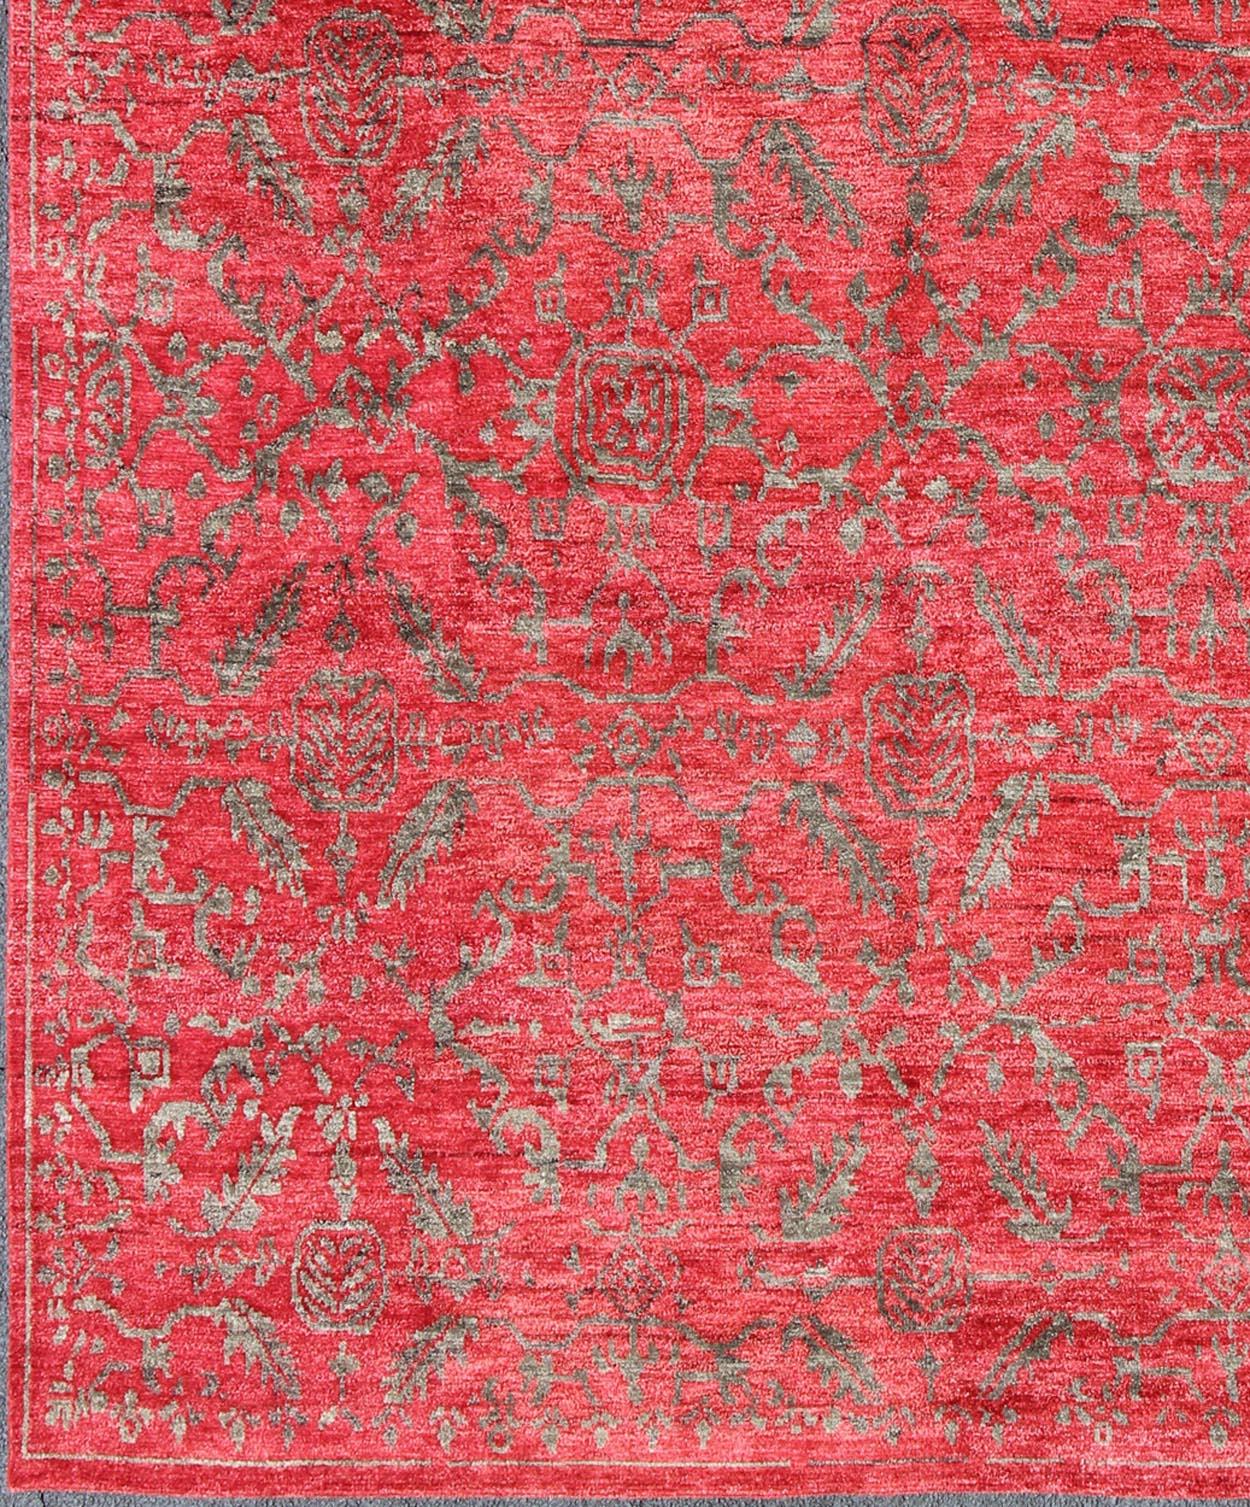 This hand knotted transitional design rug features a beautiful geometric all-over design rendered in shades of red background. This piece fits well in a modern or transitional interior.

Measures: 10'0'' x 14'0''.

Large modern rug